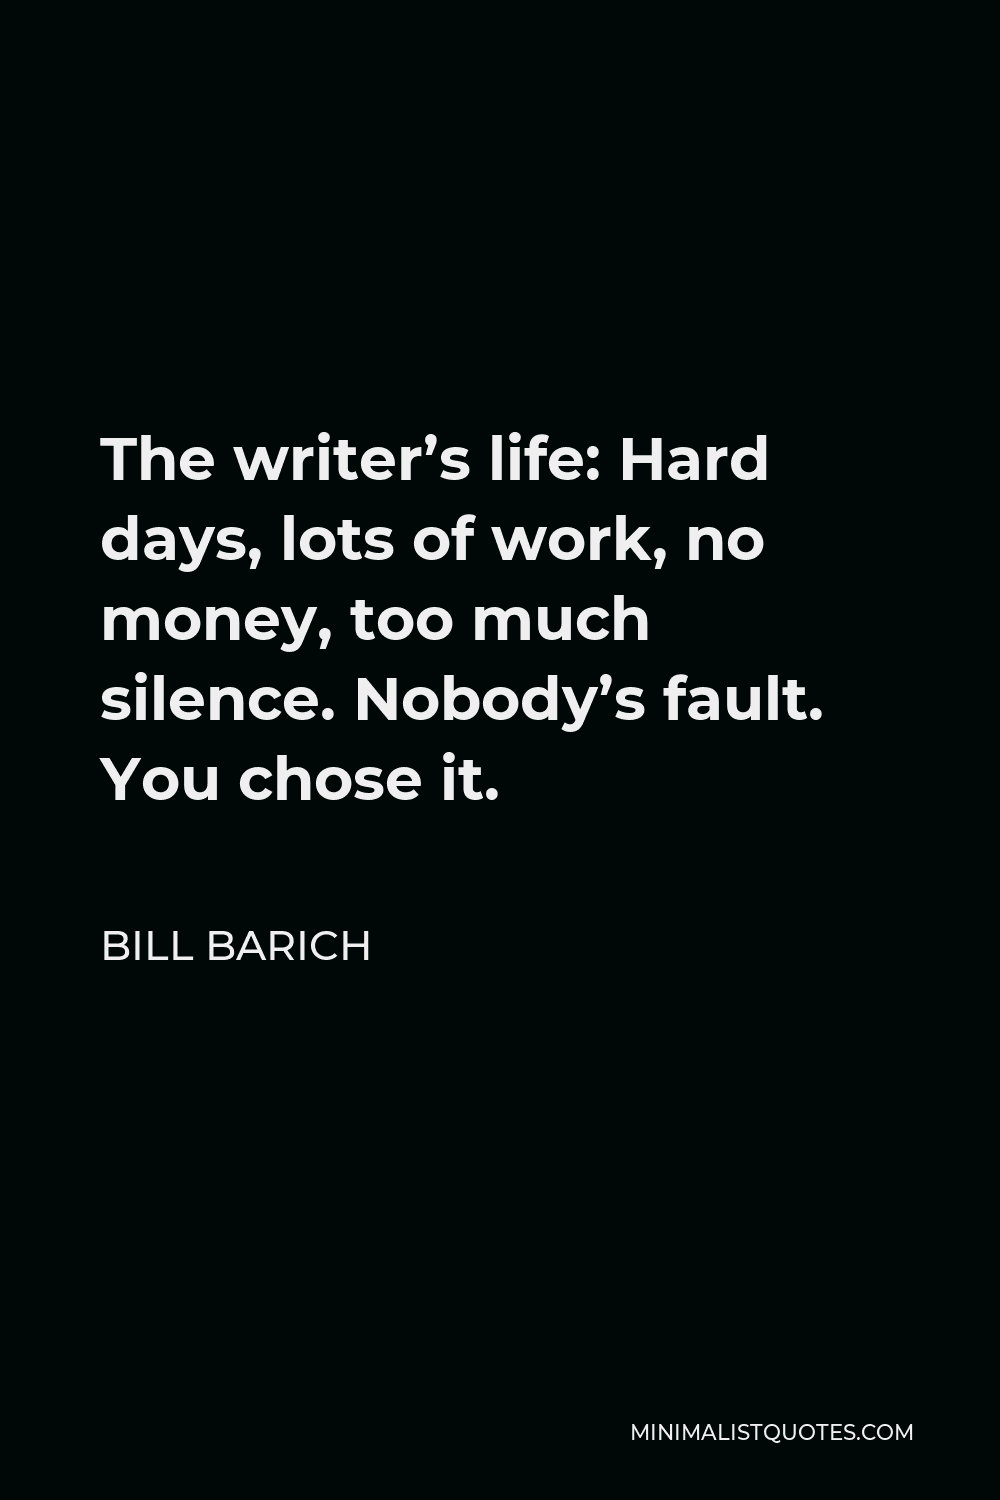 Bill Barich Quote - The writer’s life: Hard days, lots of work, no money, too much silence. Nobody’s fault. You chose it.